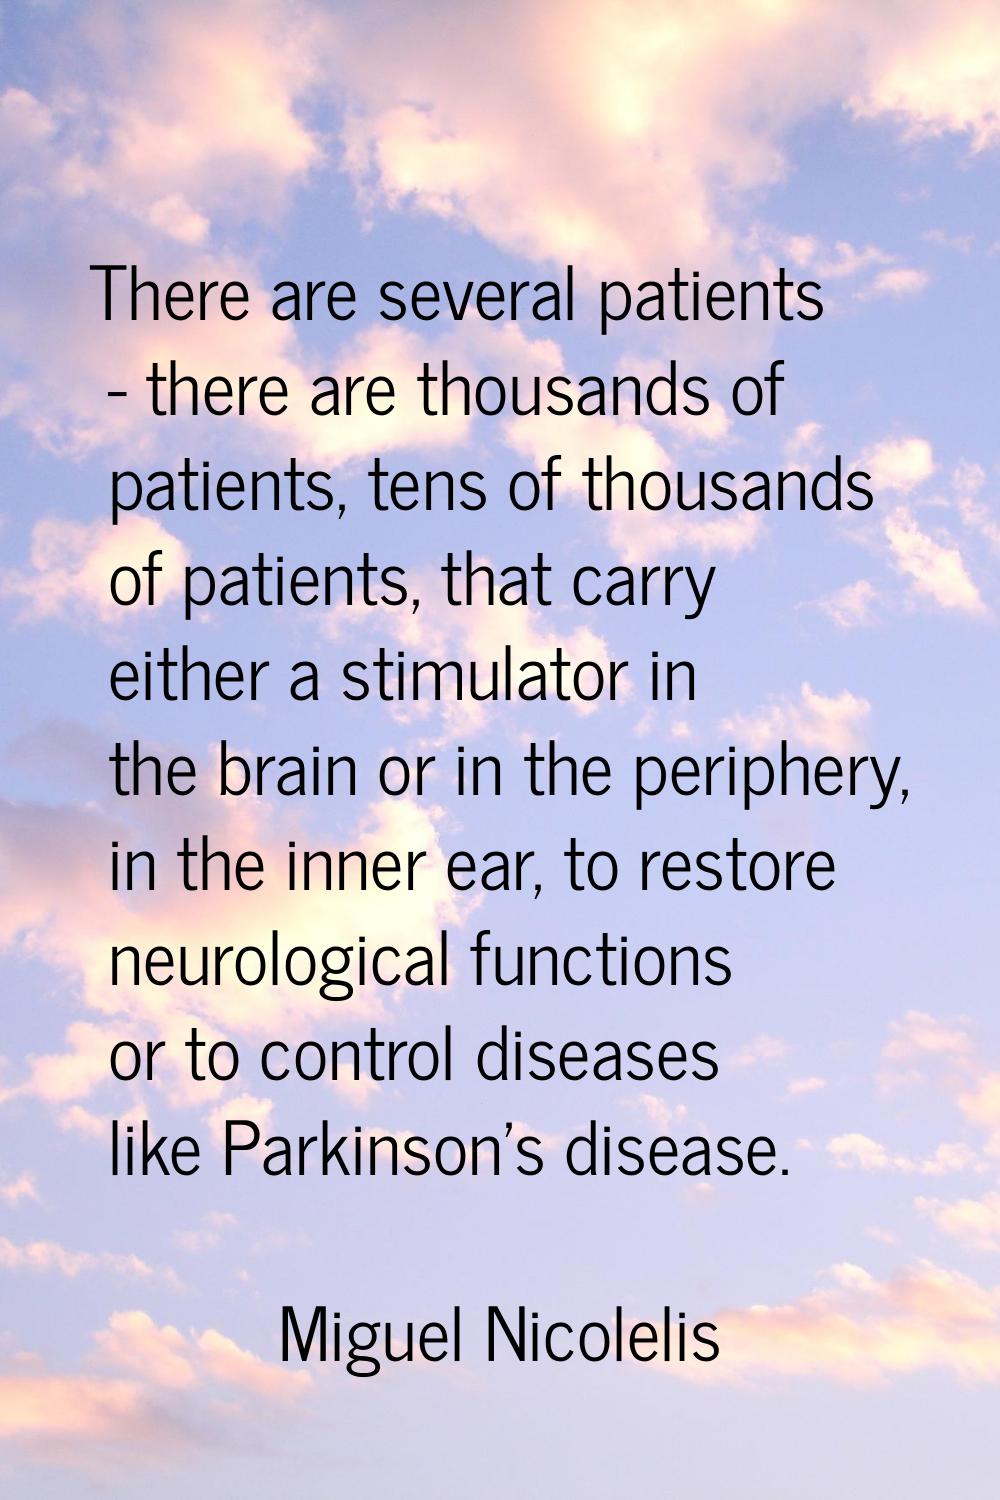 There are several patients - there are thousands of patients, tens of thousands of patients, that c